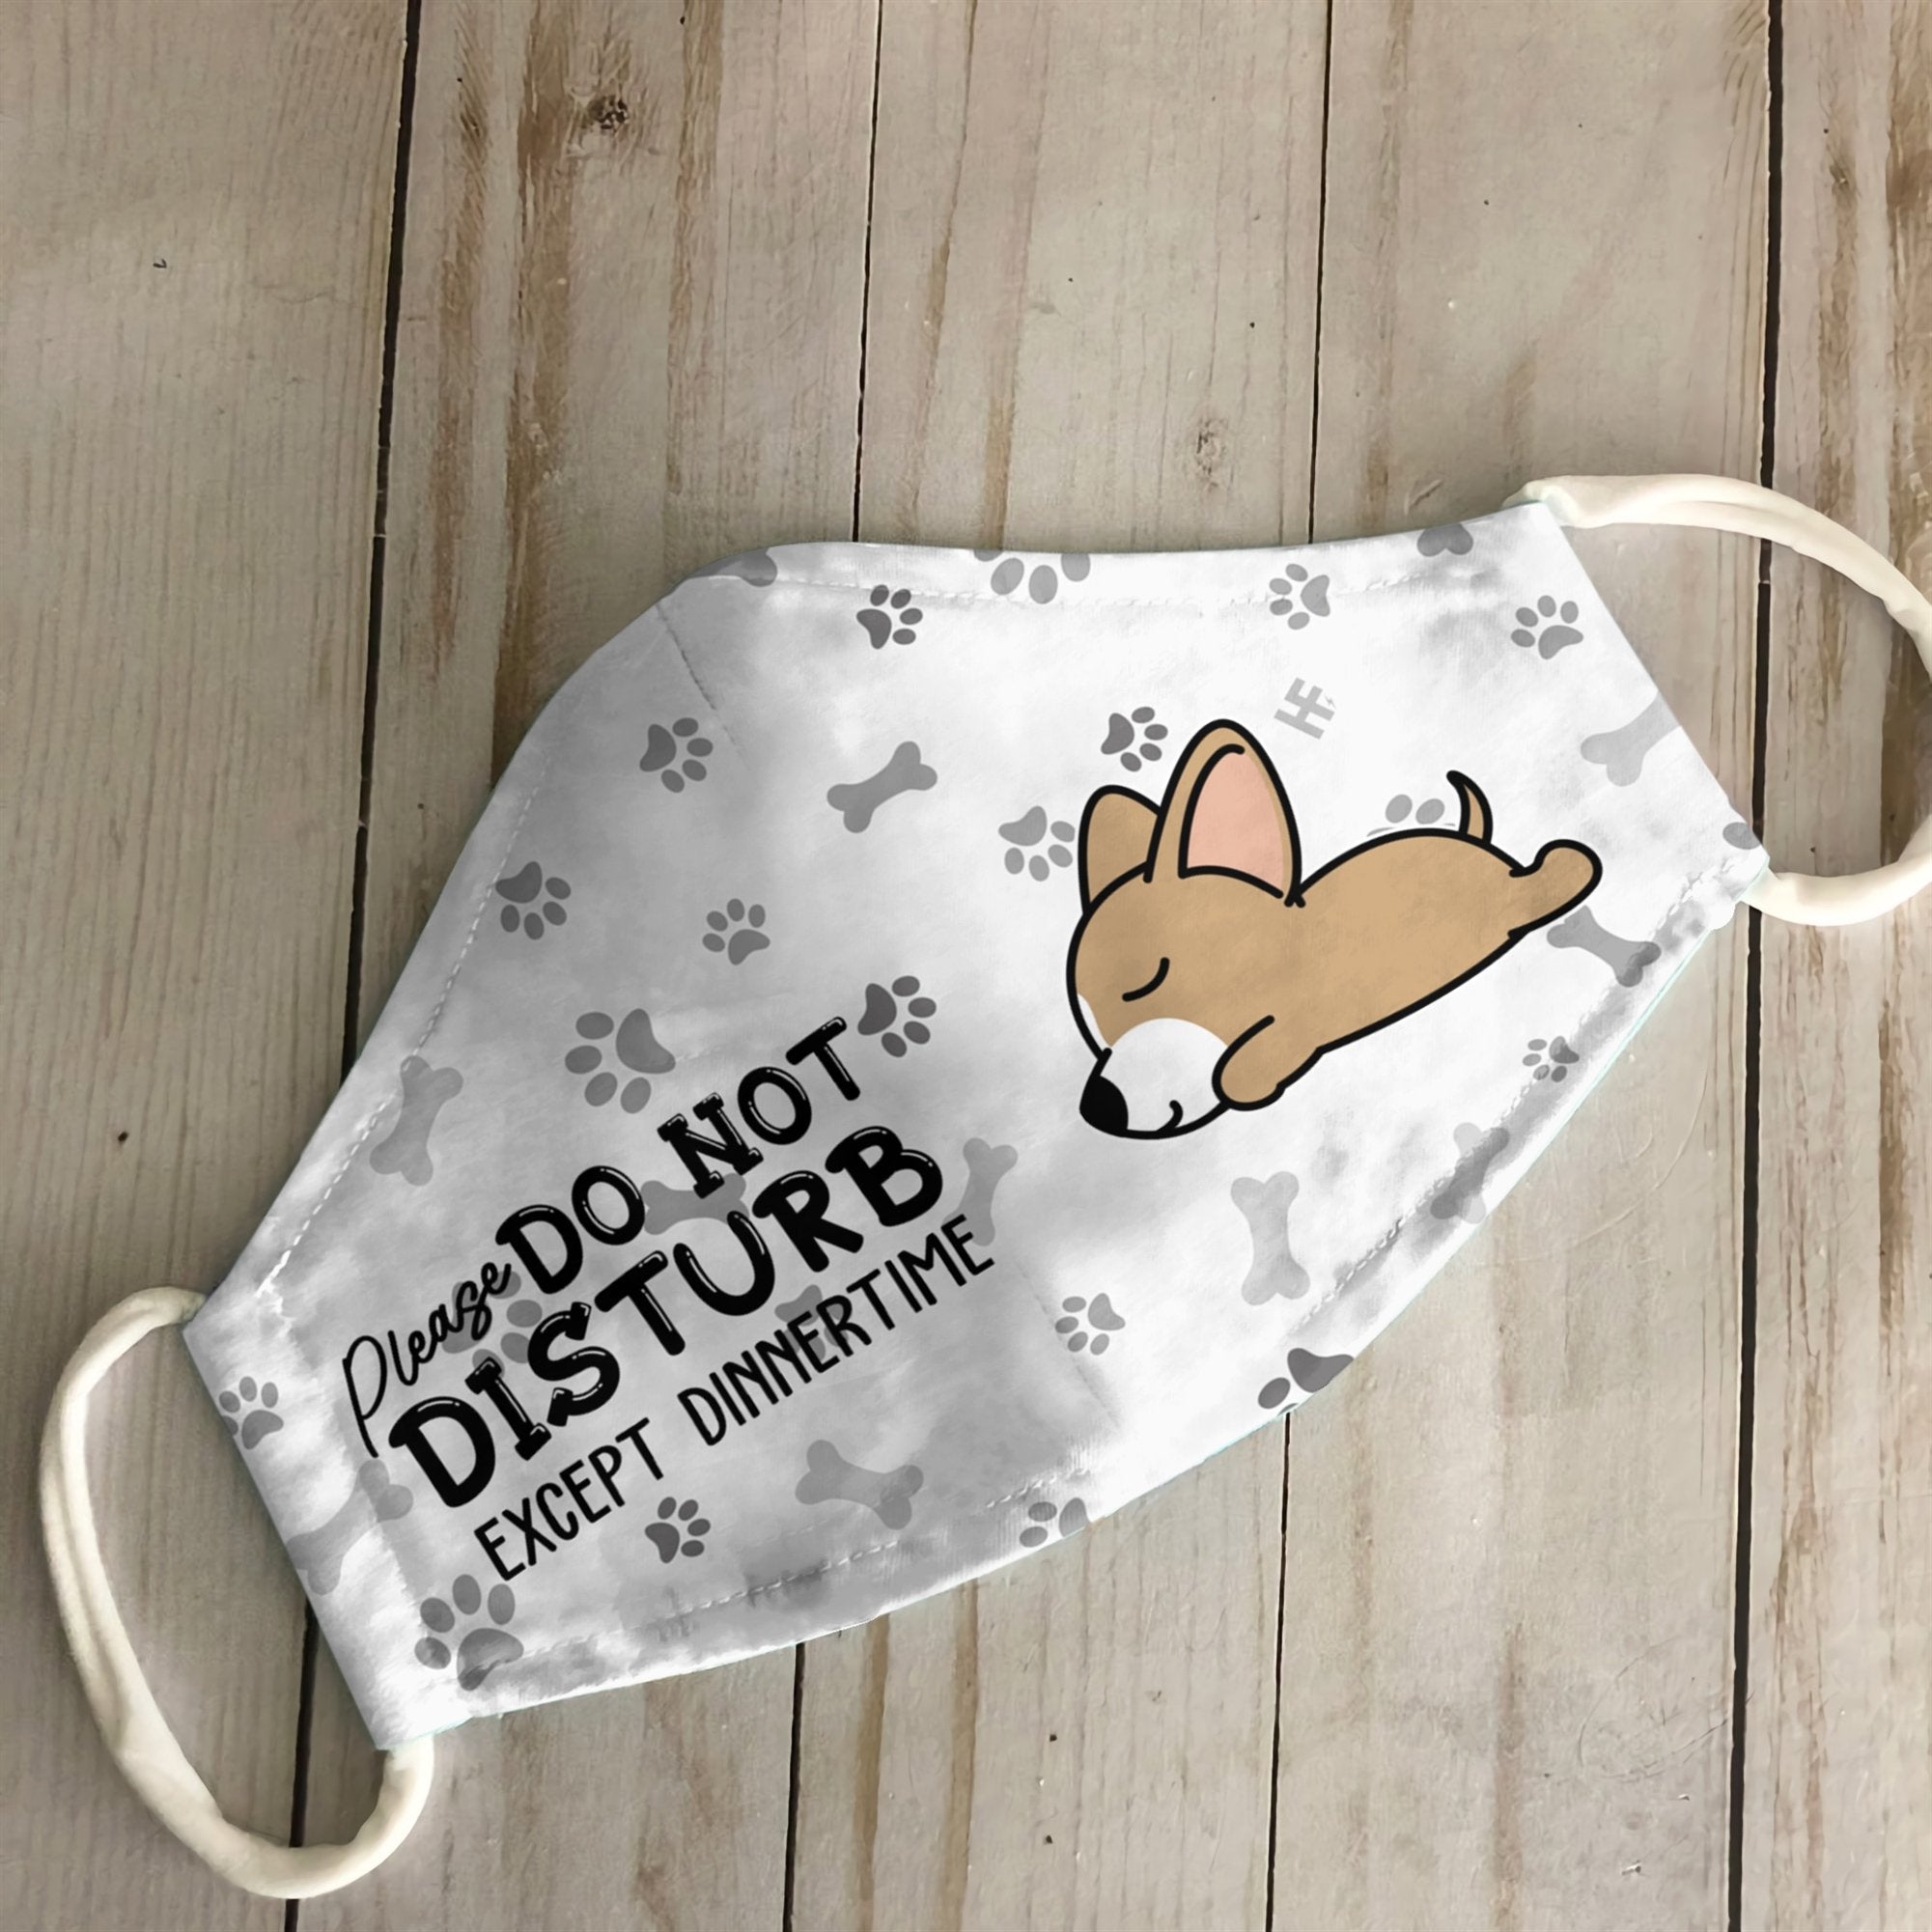 Please Do Not Disturb Except Dinnertime Chihuahua White EZ16 0807 Face Mask